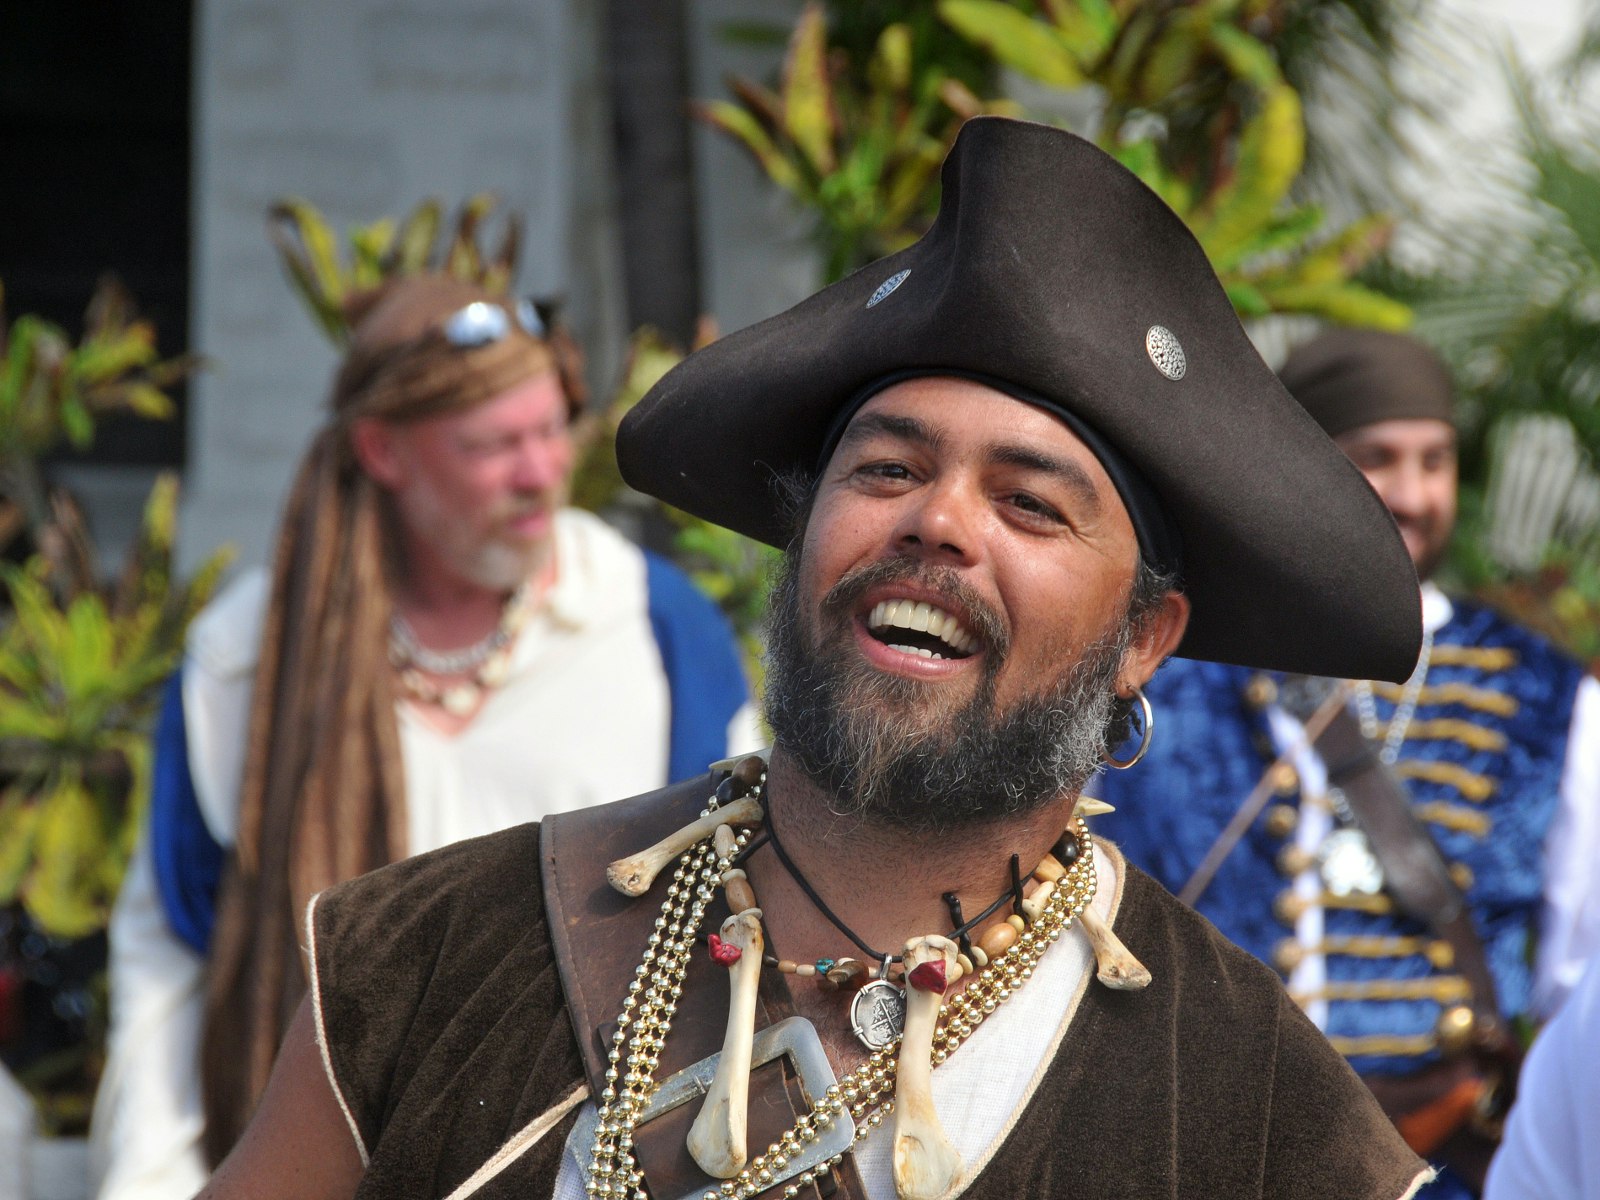 A man dressed as a pirate for Pirate Week on the Cayman Islands